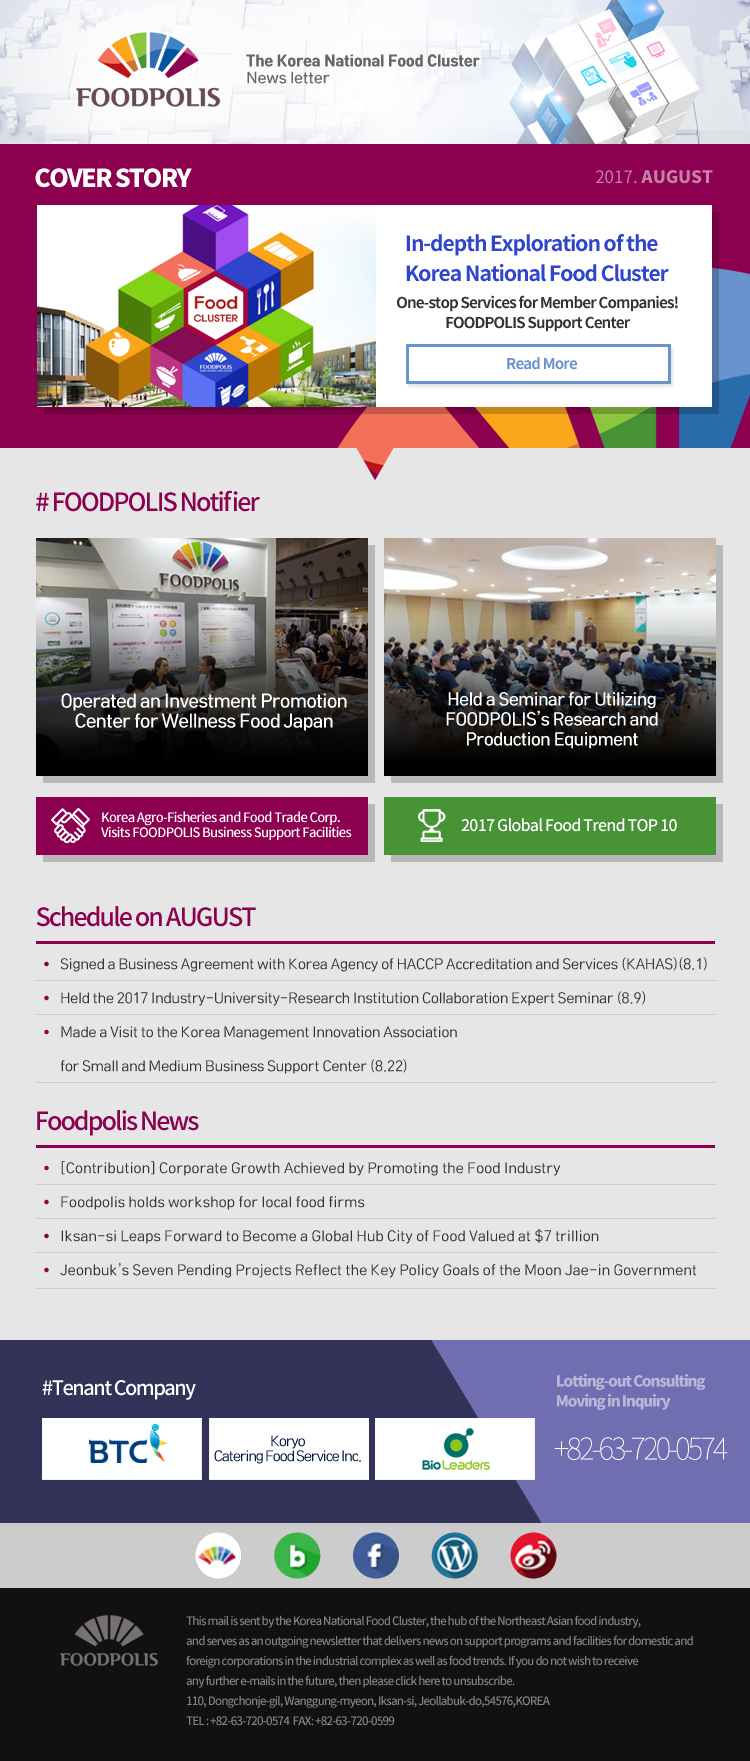 2017 Aug News Letter from the Korea National Food Cluster